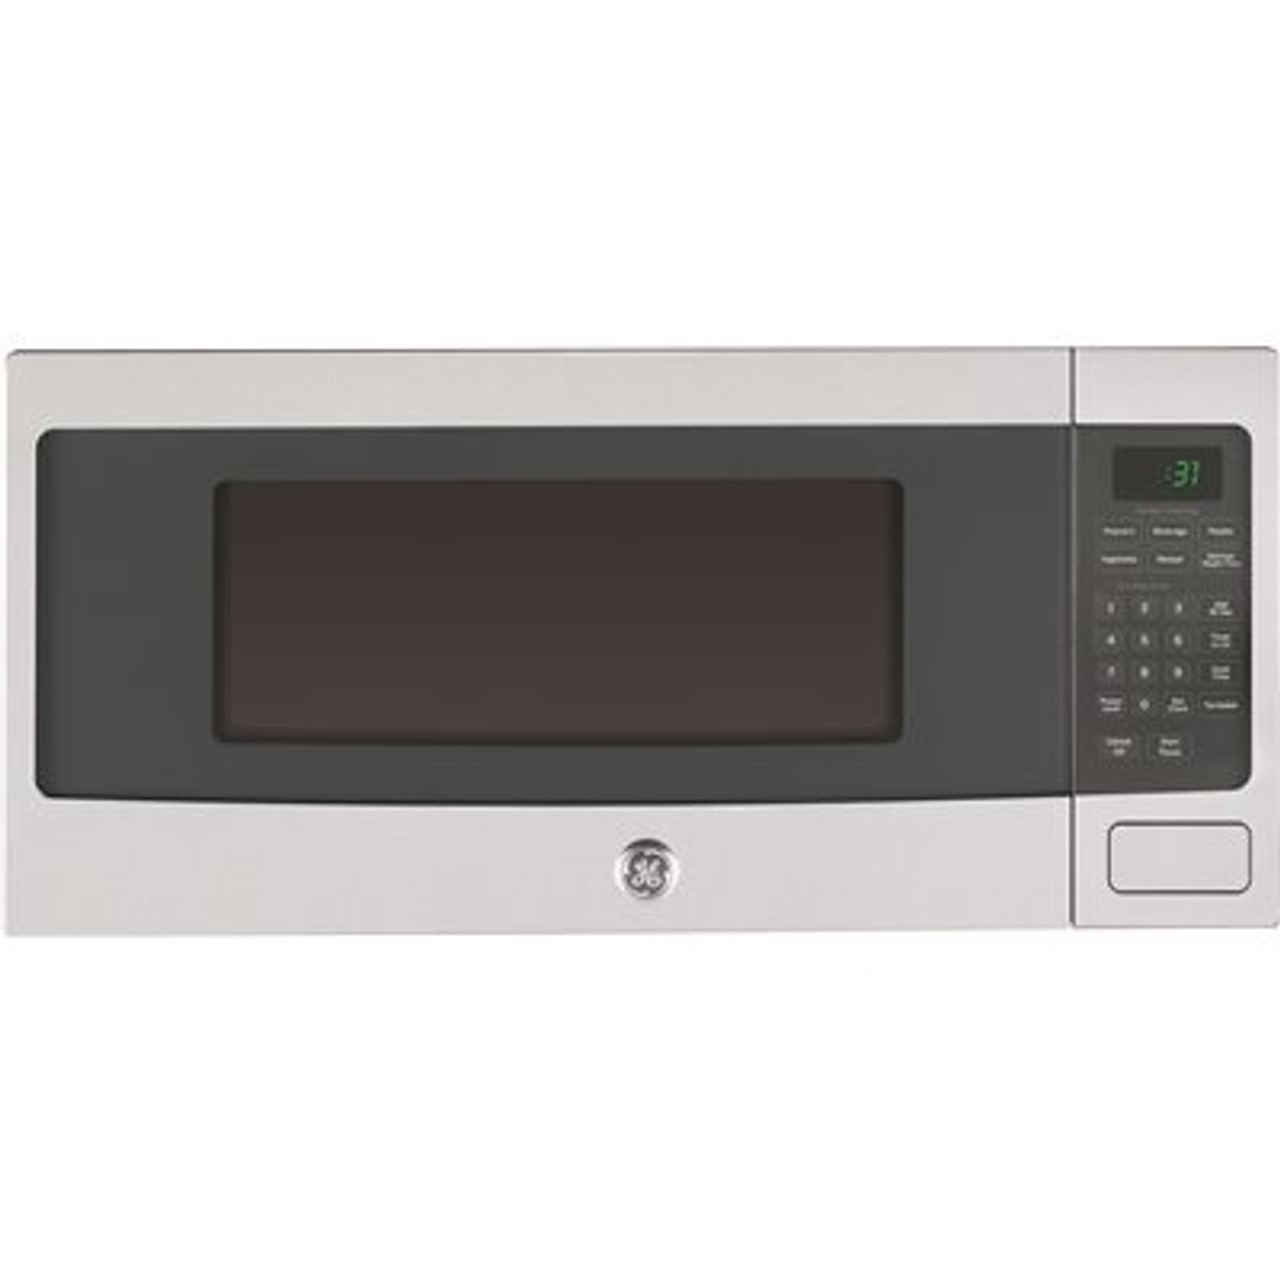 GE Profile Profile 1.1 cu. ft. Countertop Microwave in Stainless Steel with Sensor Cooking